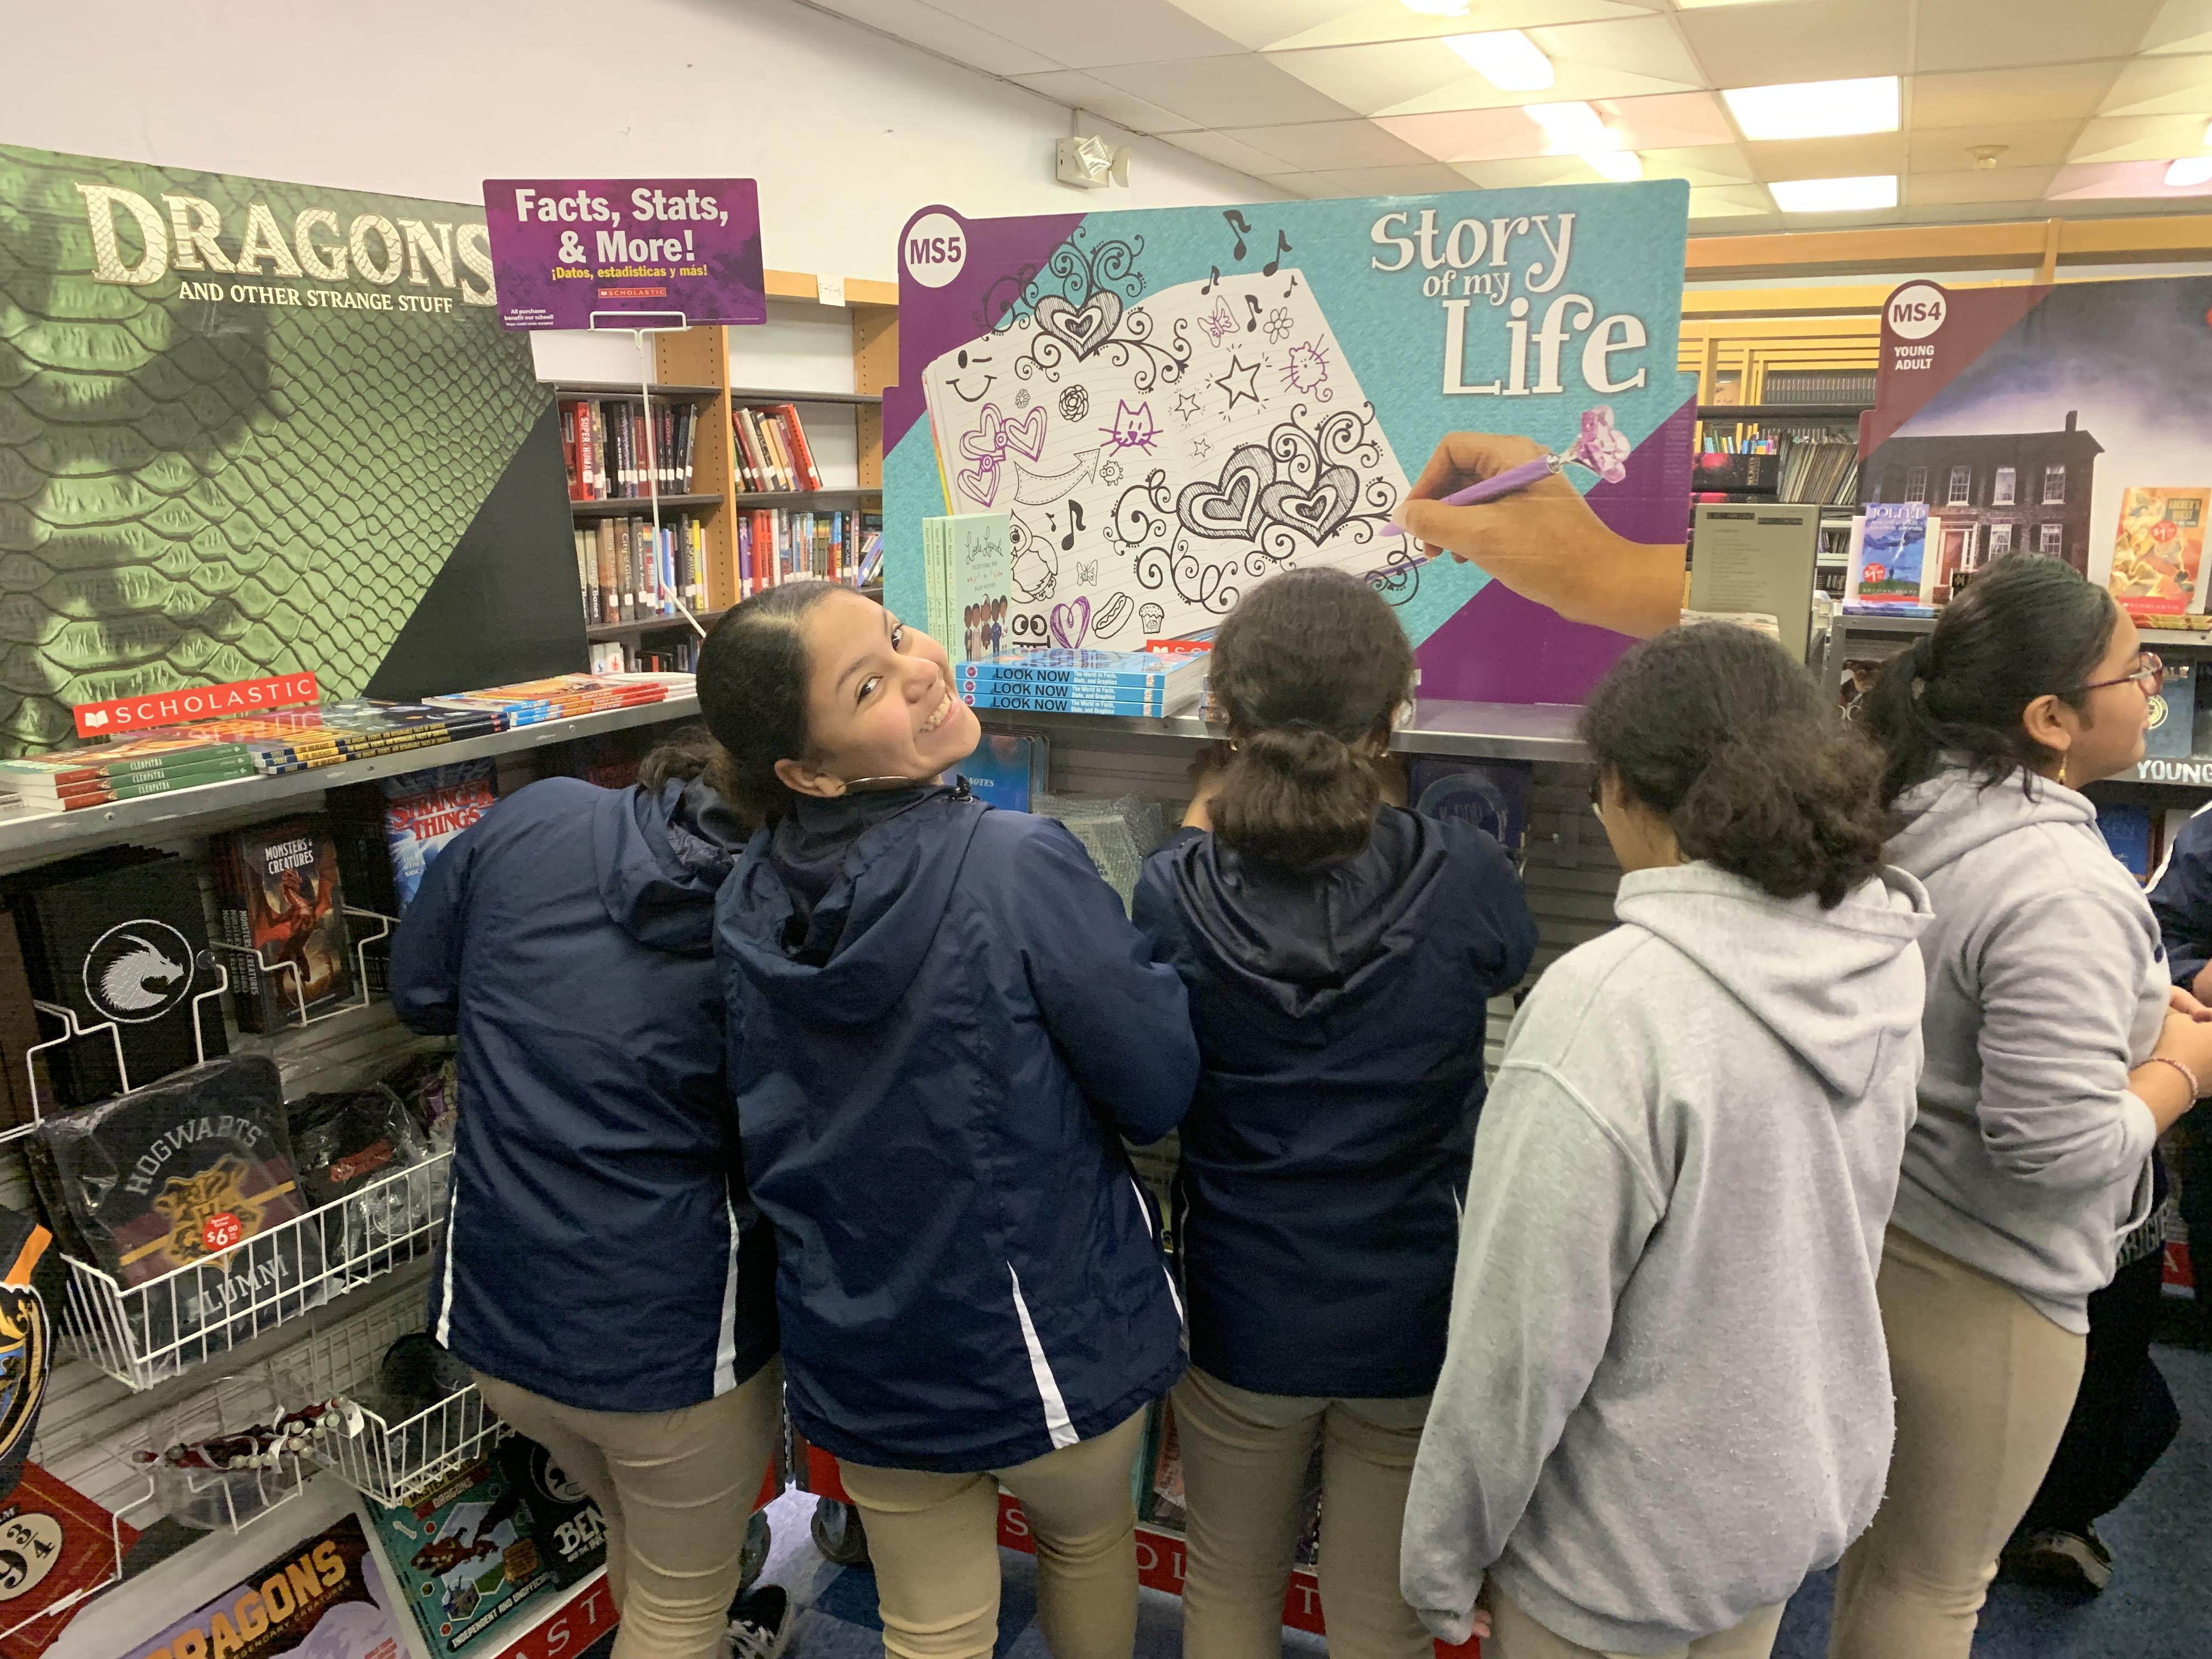 students looking at the books while a girl looks back and smiles